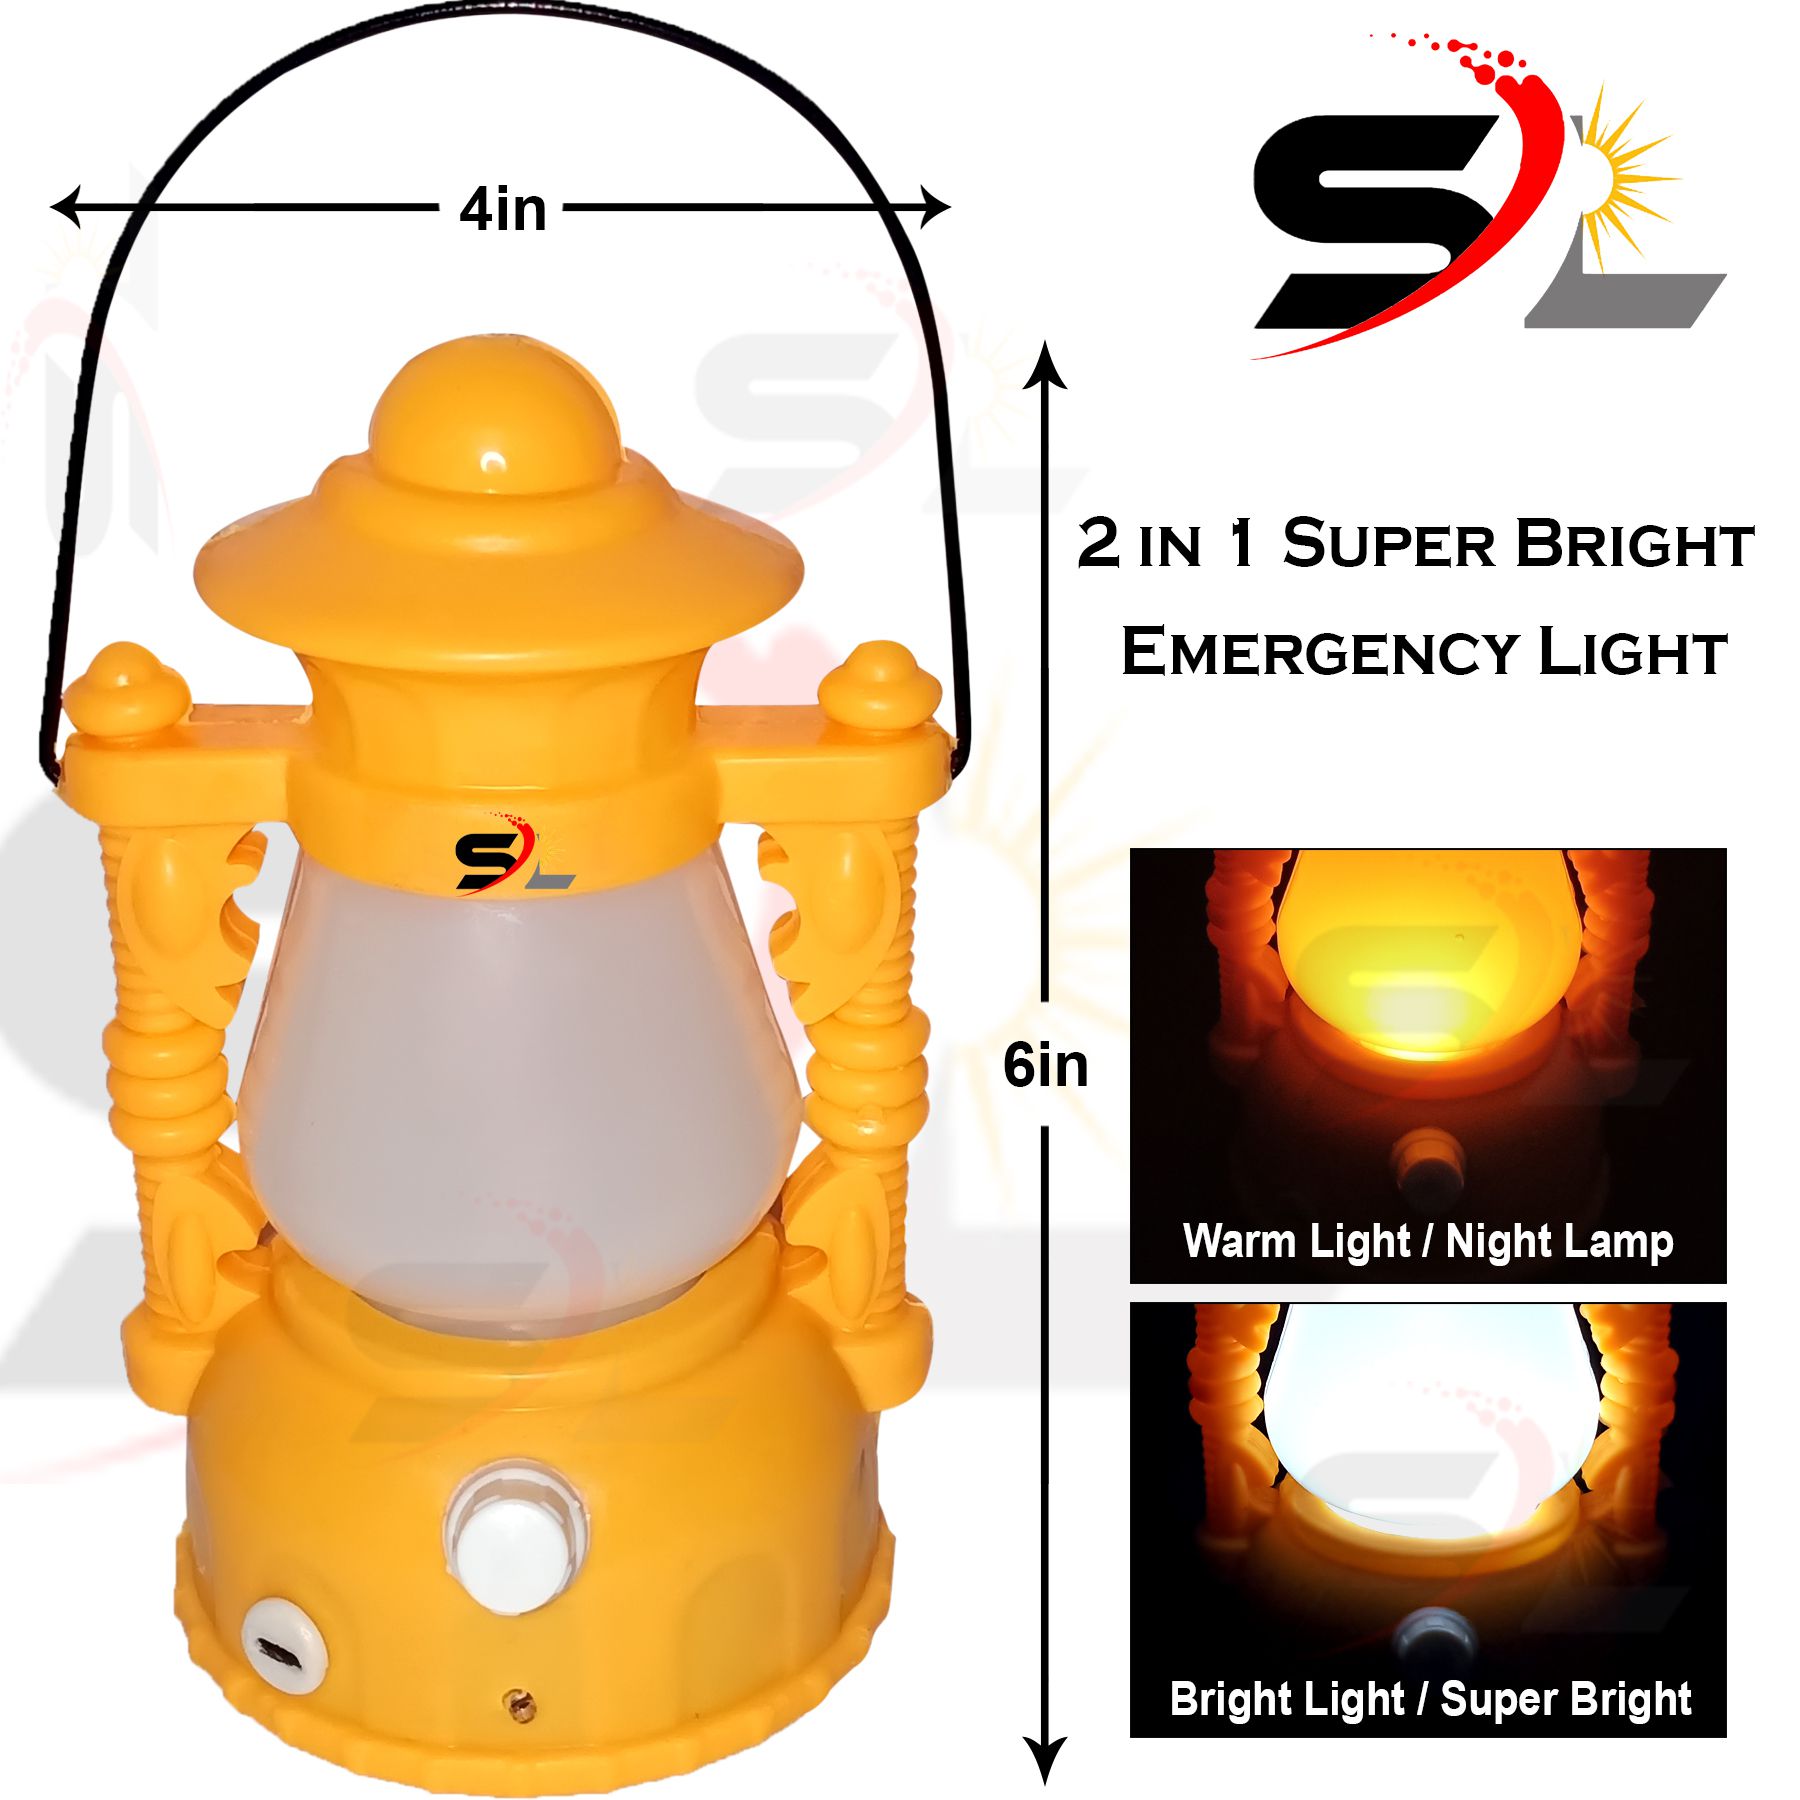 SL Light's & Lamp 6W Emergency Rechargeable Light Night Lamp StudyLamp - Pack of 1